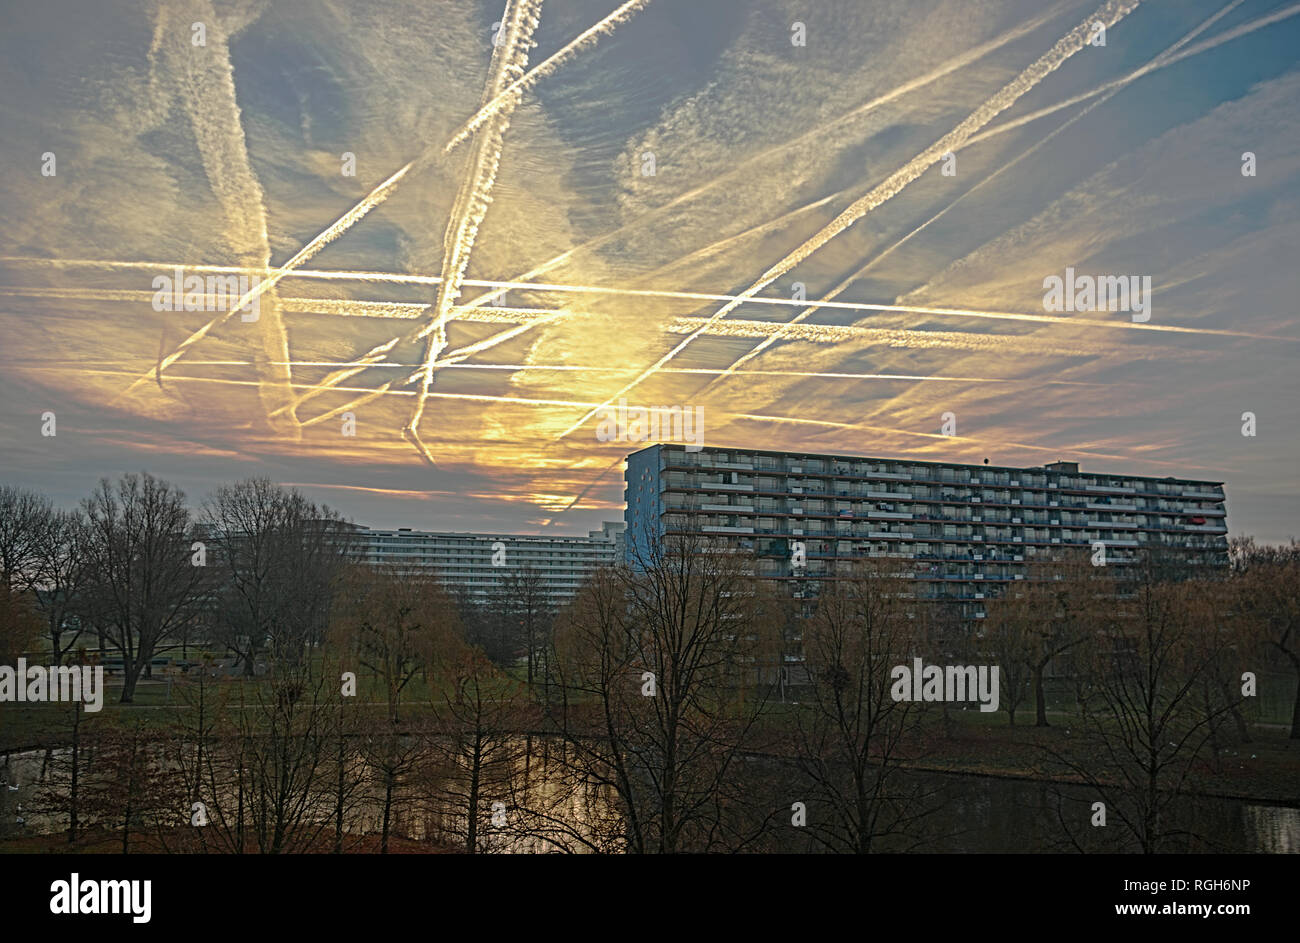 Chessboard sky, with the white vapor trails of plains coming from or going to nearby Schiphol airport. A fascinating pattern showing the 'airlines- cr Stock Photo